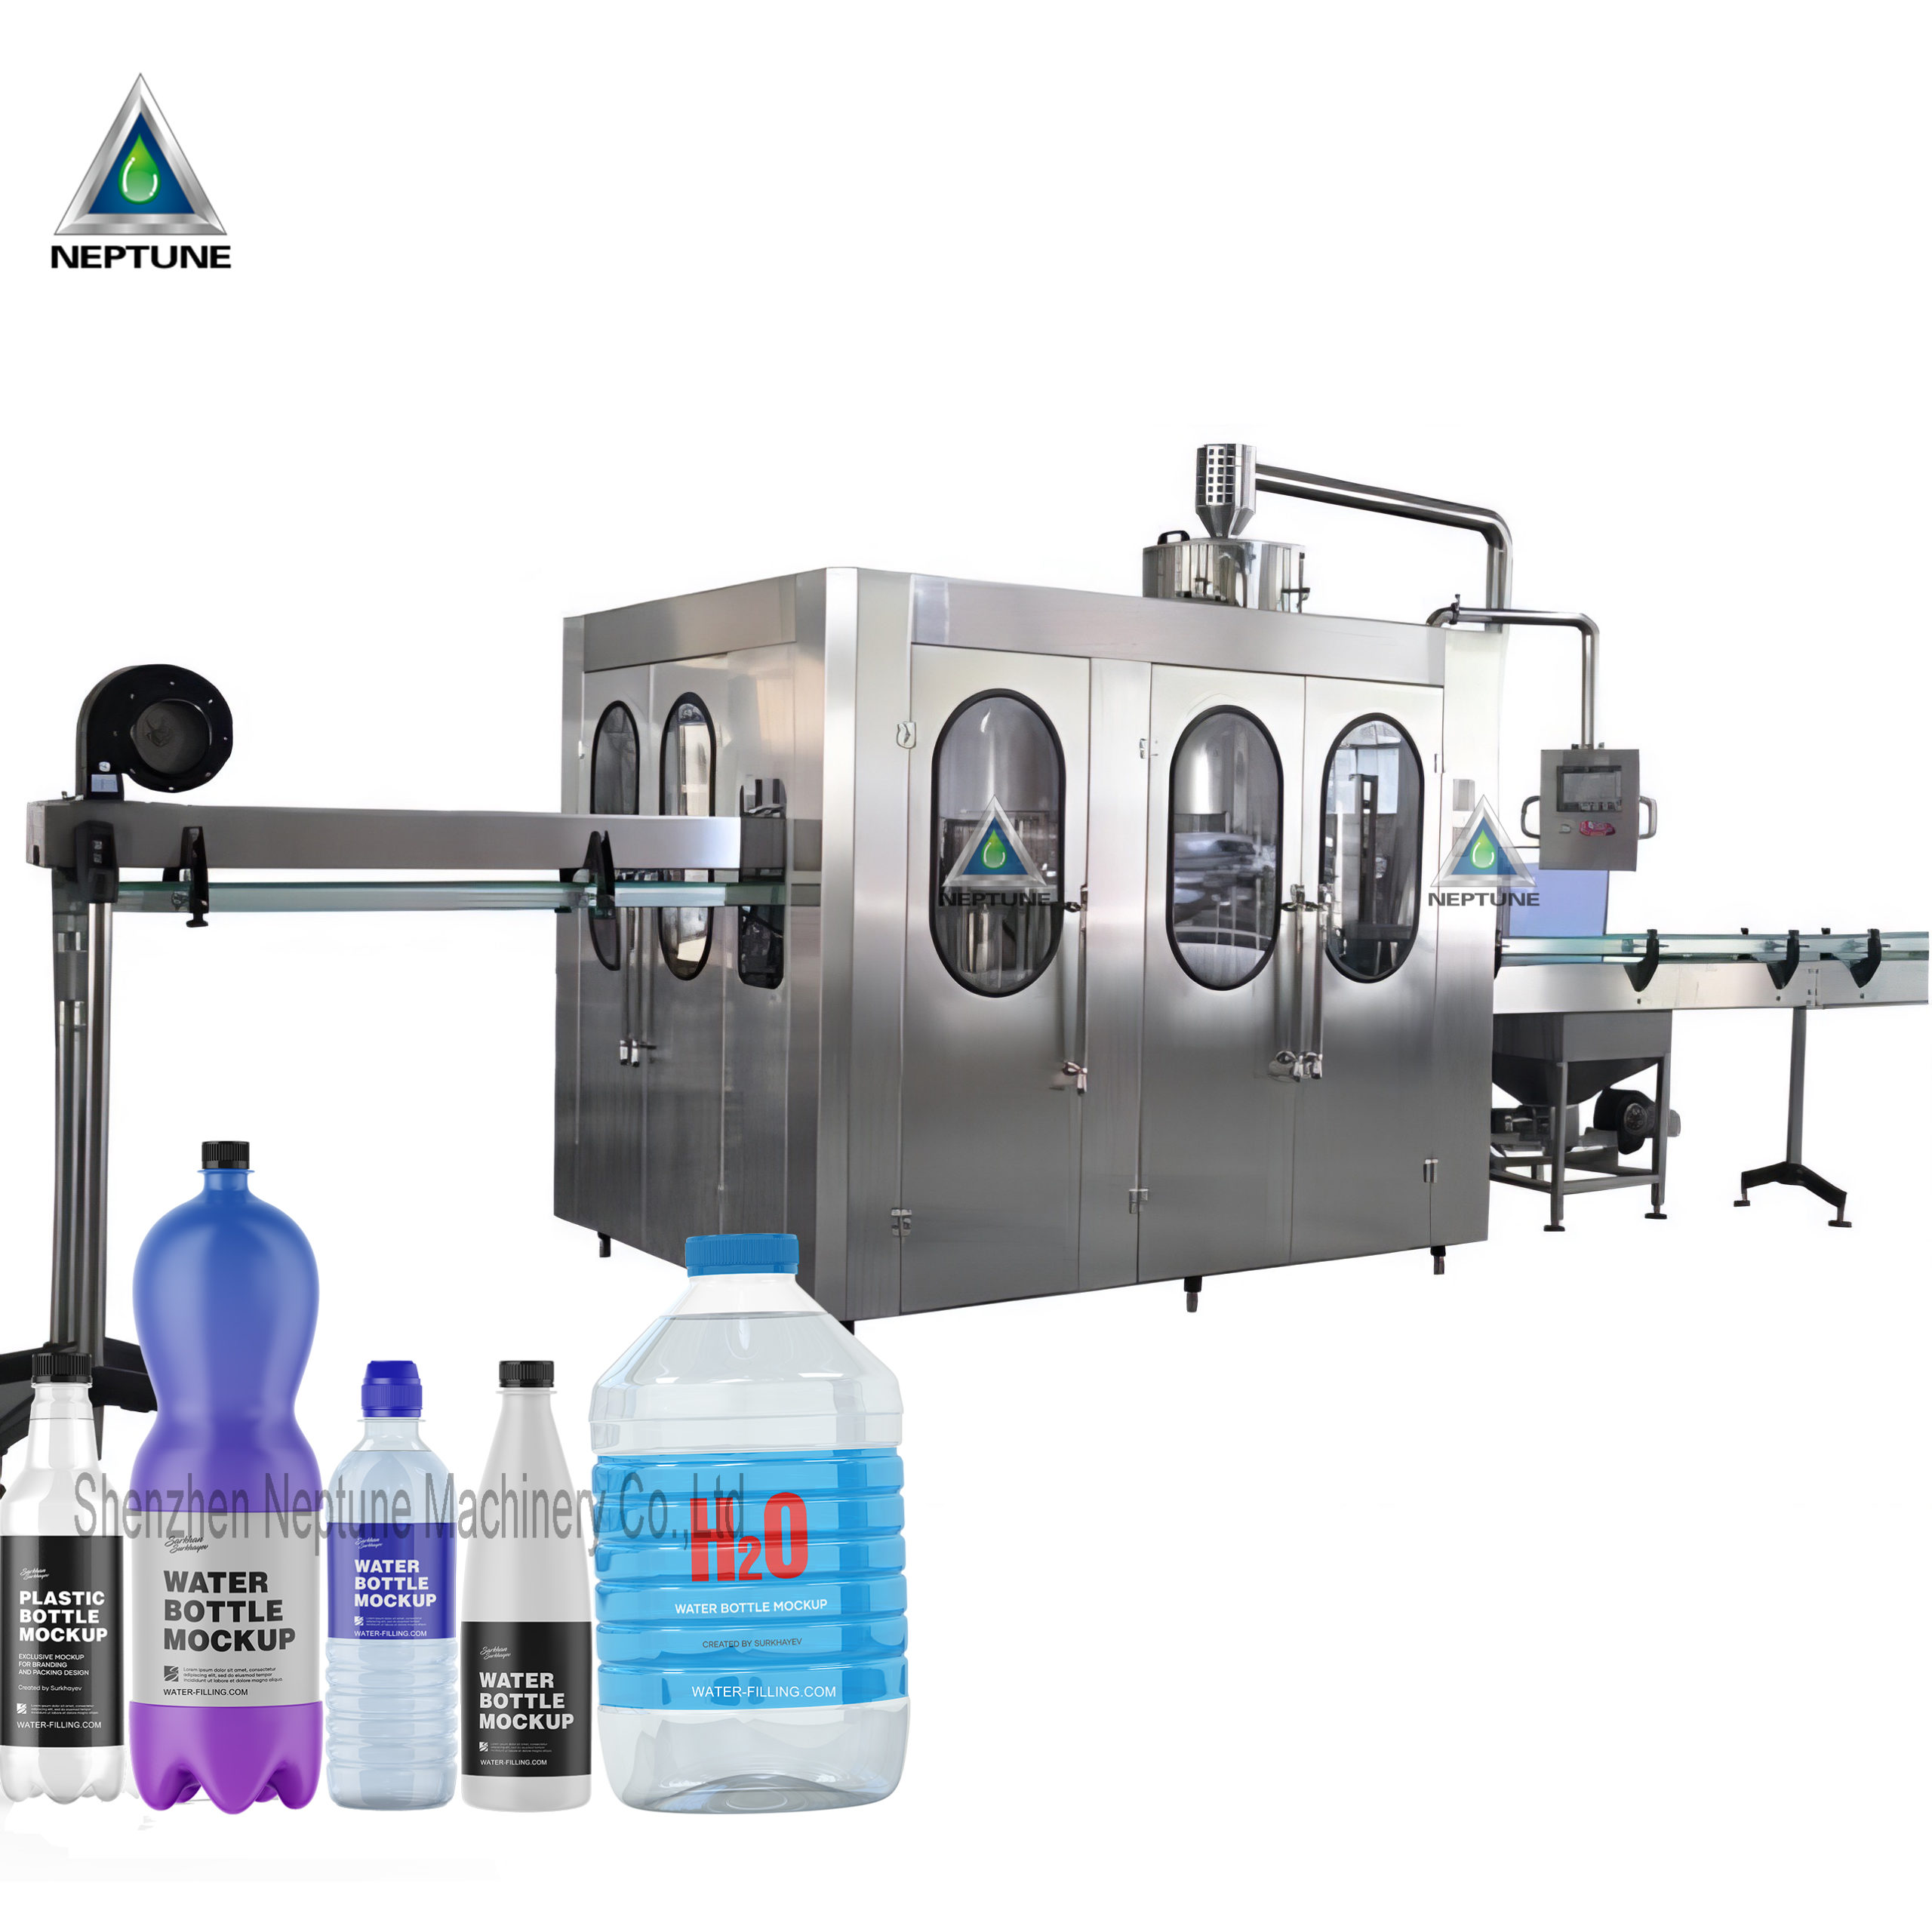 Fast bottled water filling machine for sale. 24psc filling valve , 24psc washing valve and 8 psc capper head. 